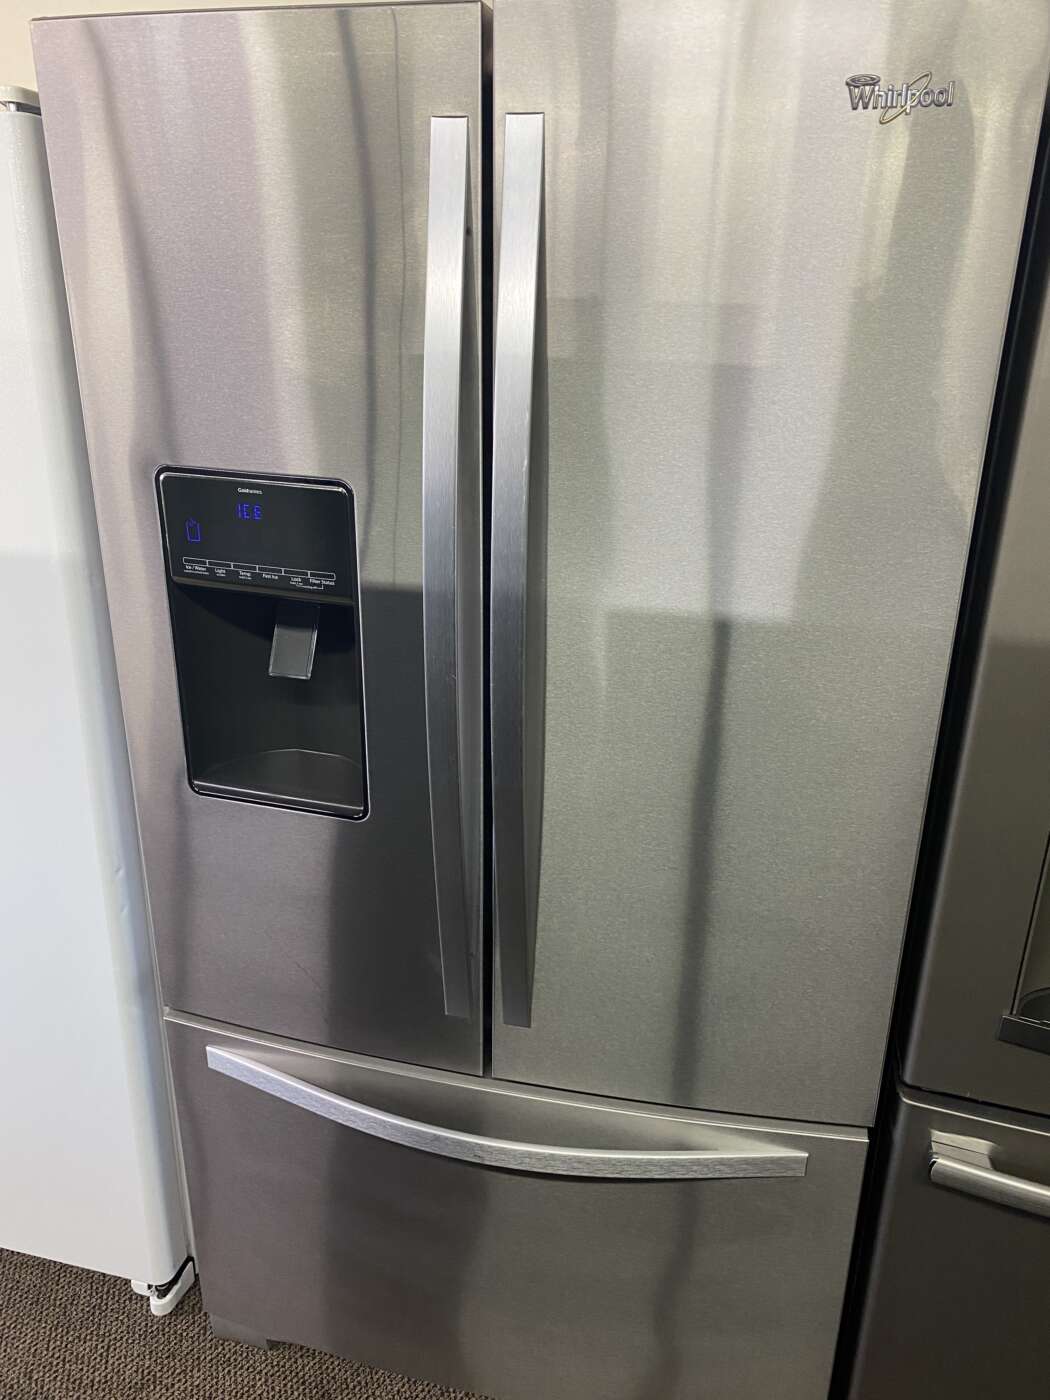 Reconditioned WHIRLPOOL 25 Cu. Ft. French-Door Refrigerator